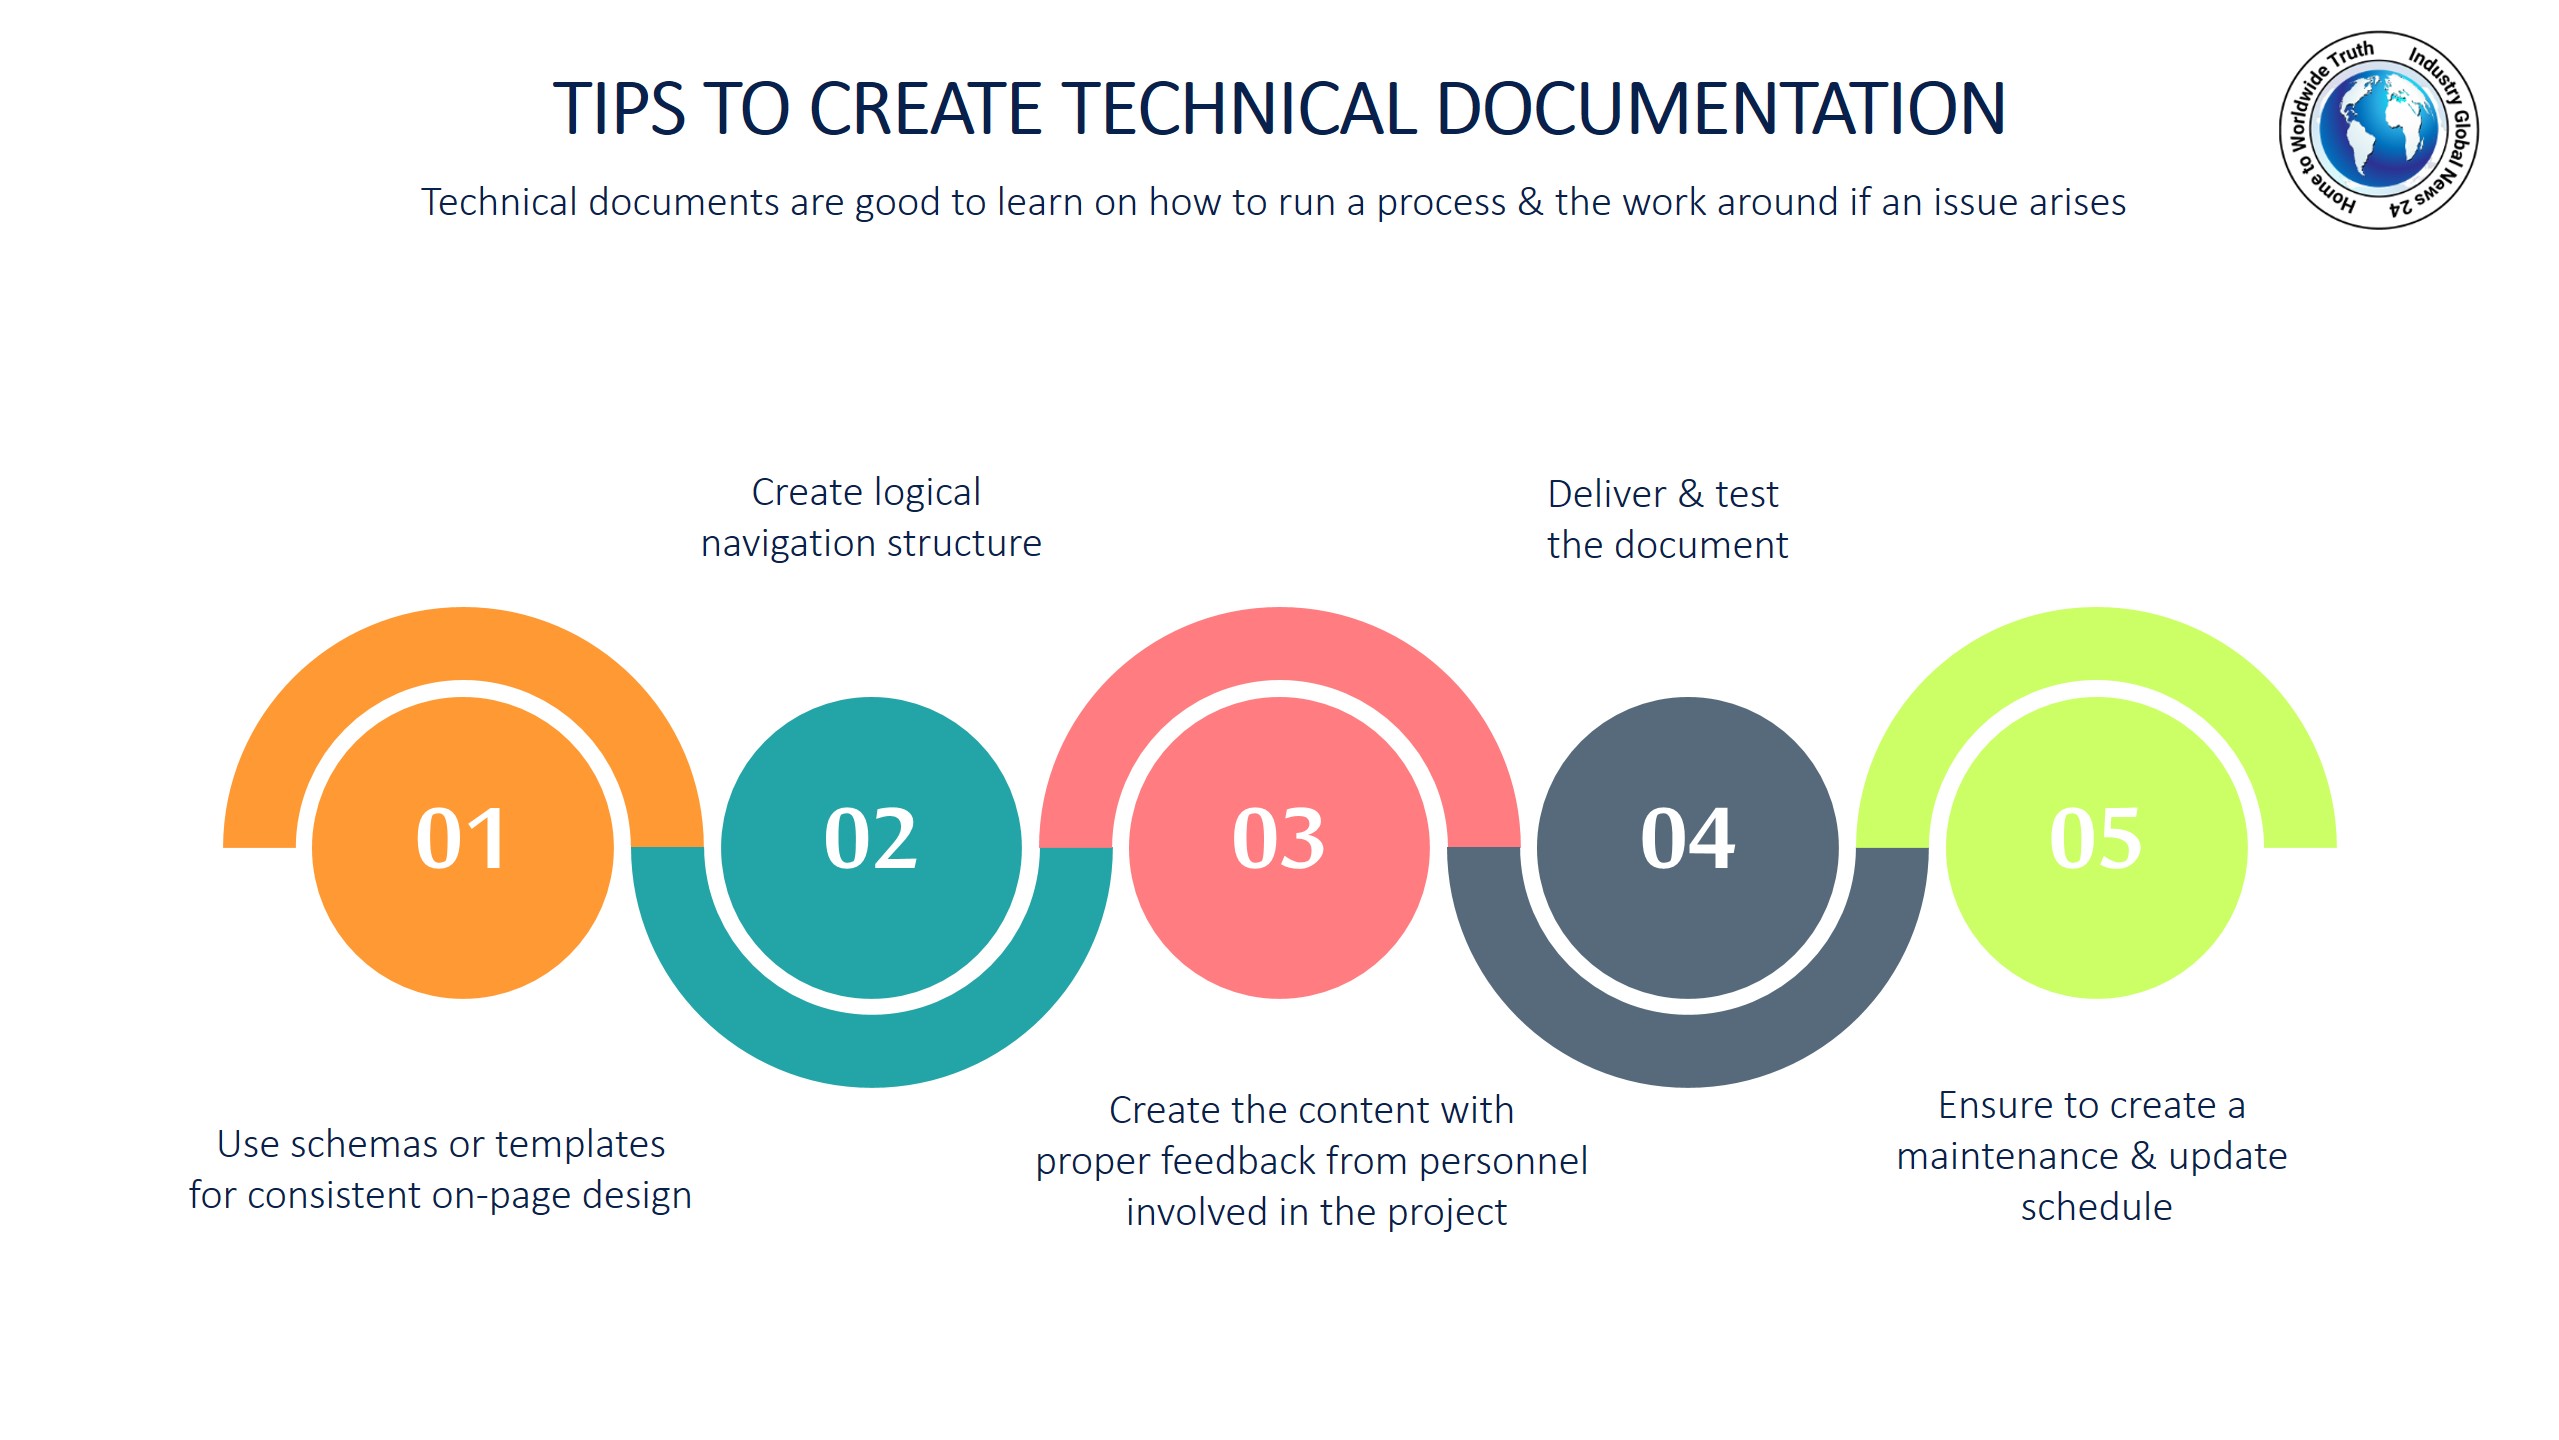 Tips to create technical documentation